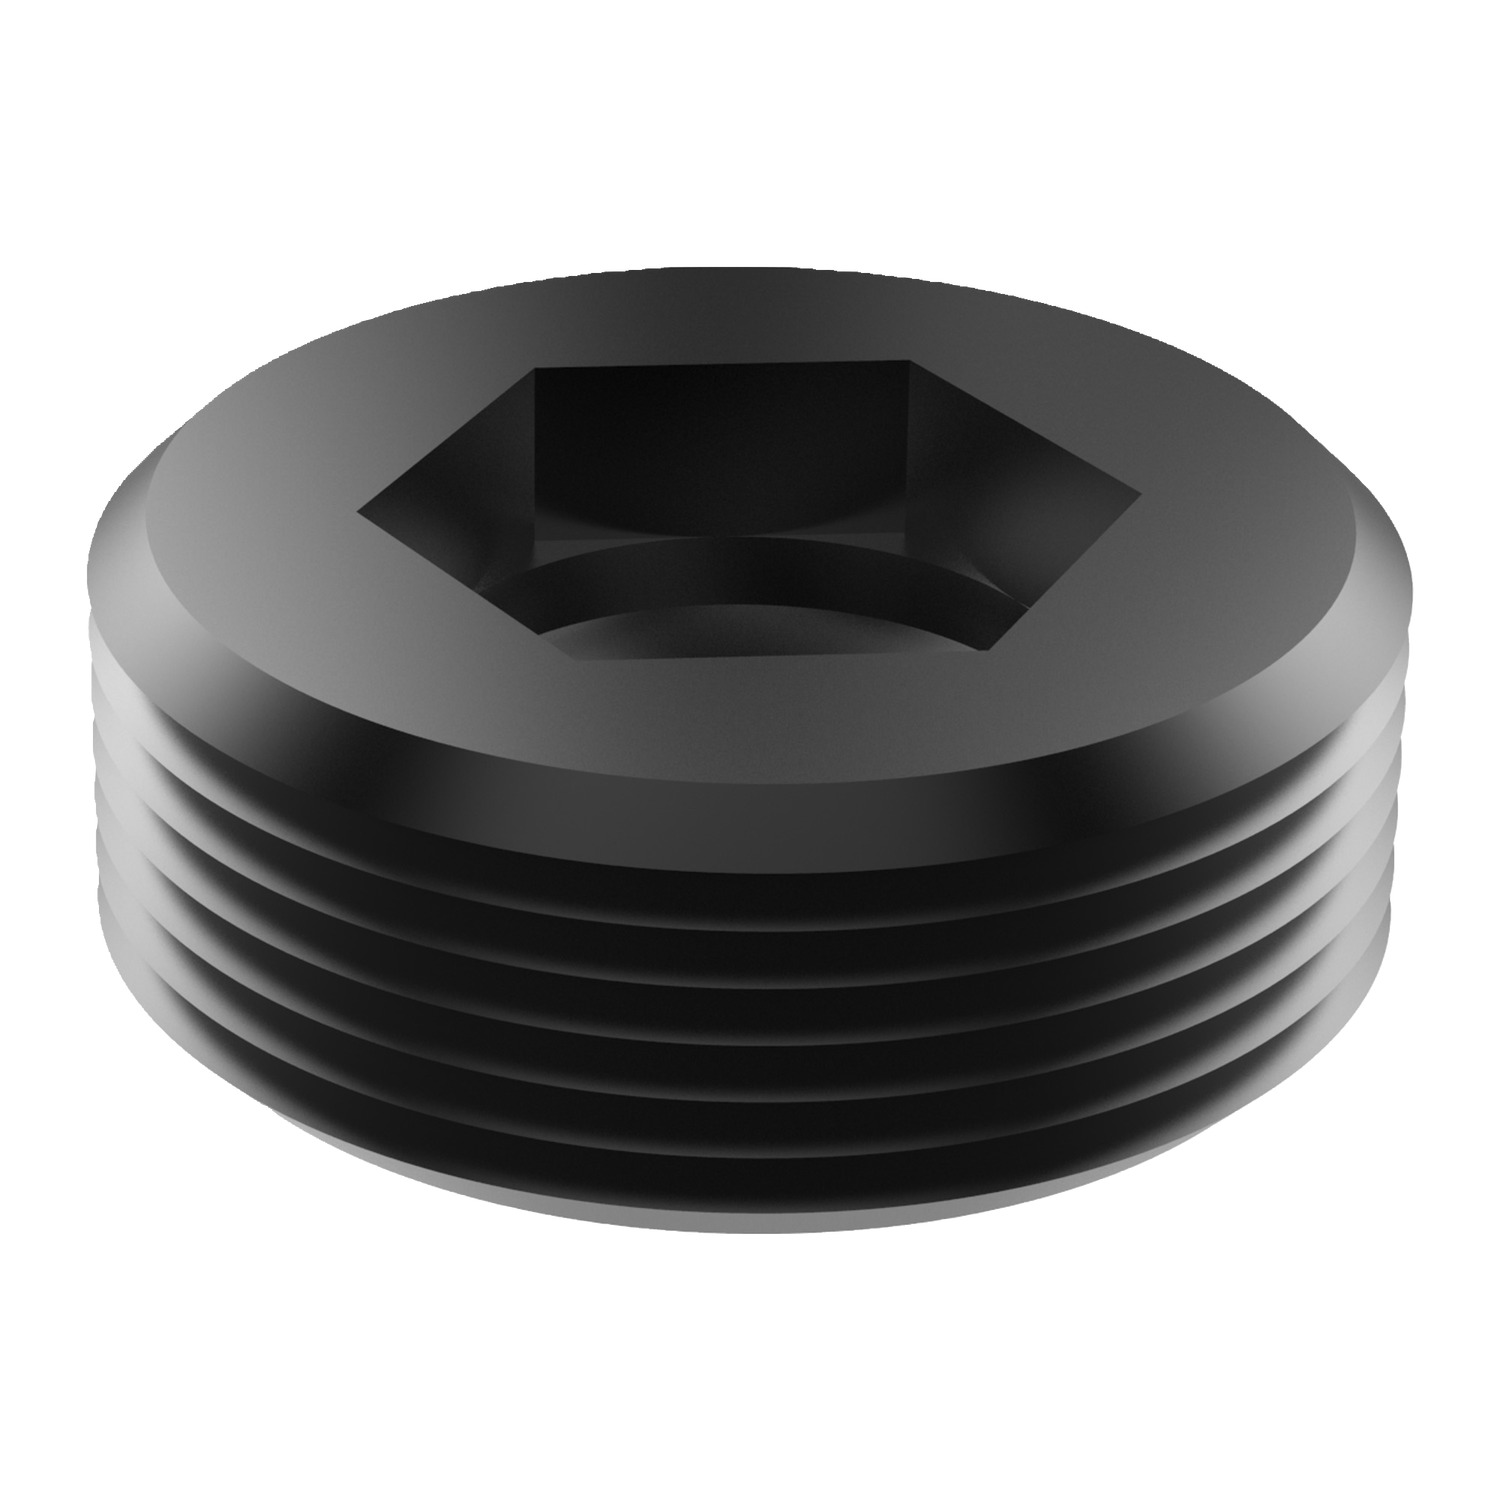 Blanking Plugs Blanking plug sealing screw for creating bi-directional seals. Ideal for use in applications where foreign contaminates such as dirt are an issue.